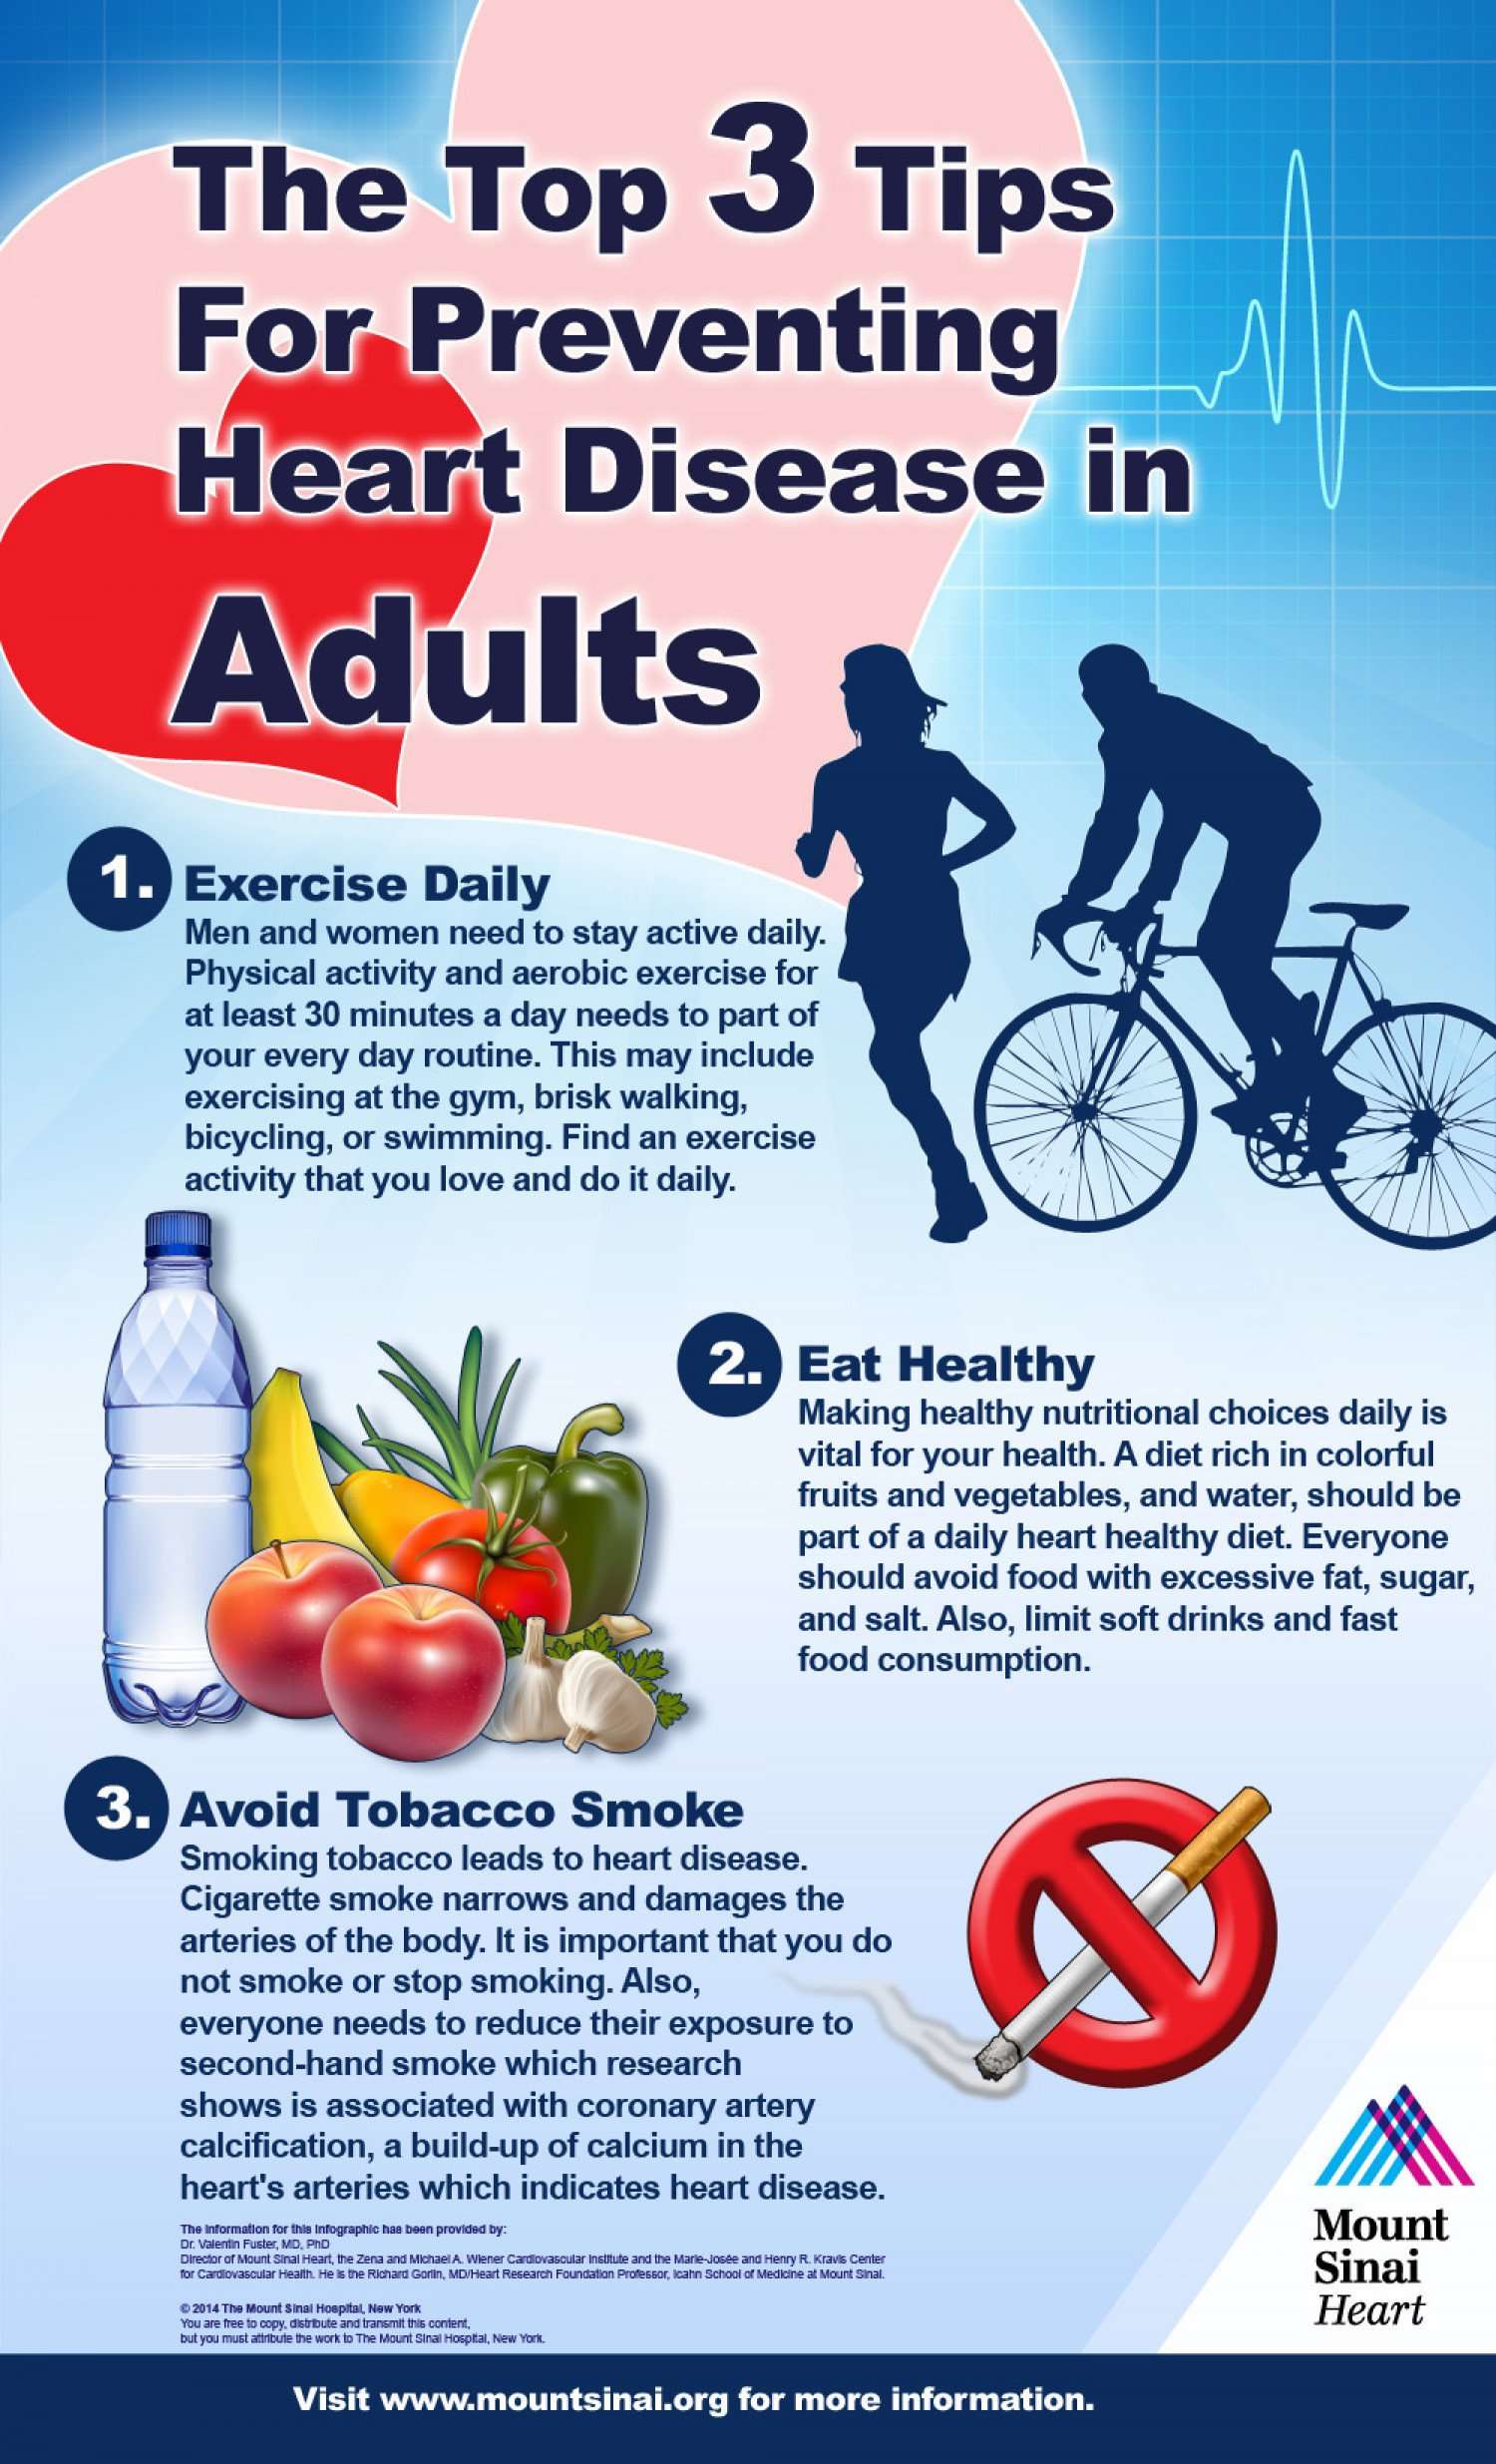 The Top 3 Tips for Preventing Heart Disease in Adults ...